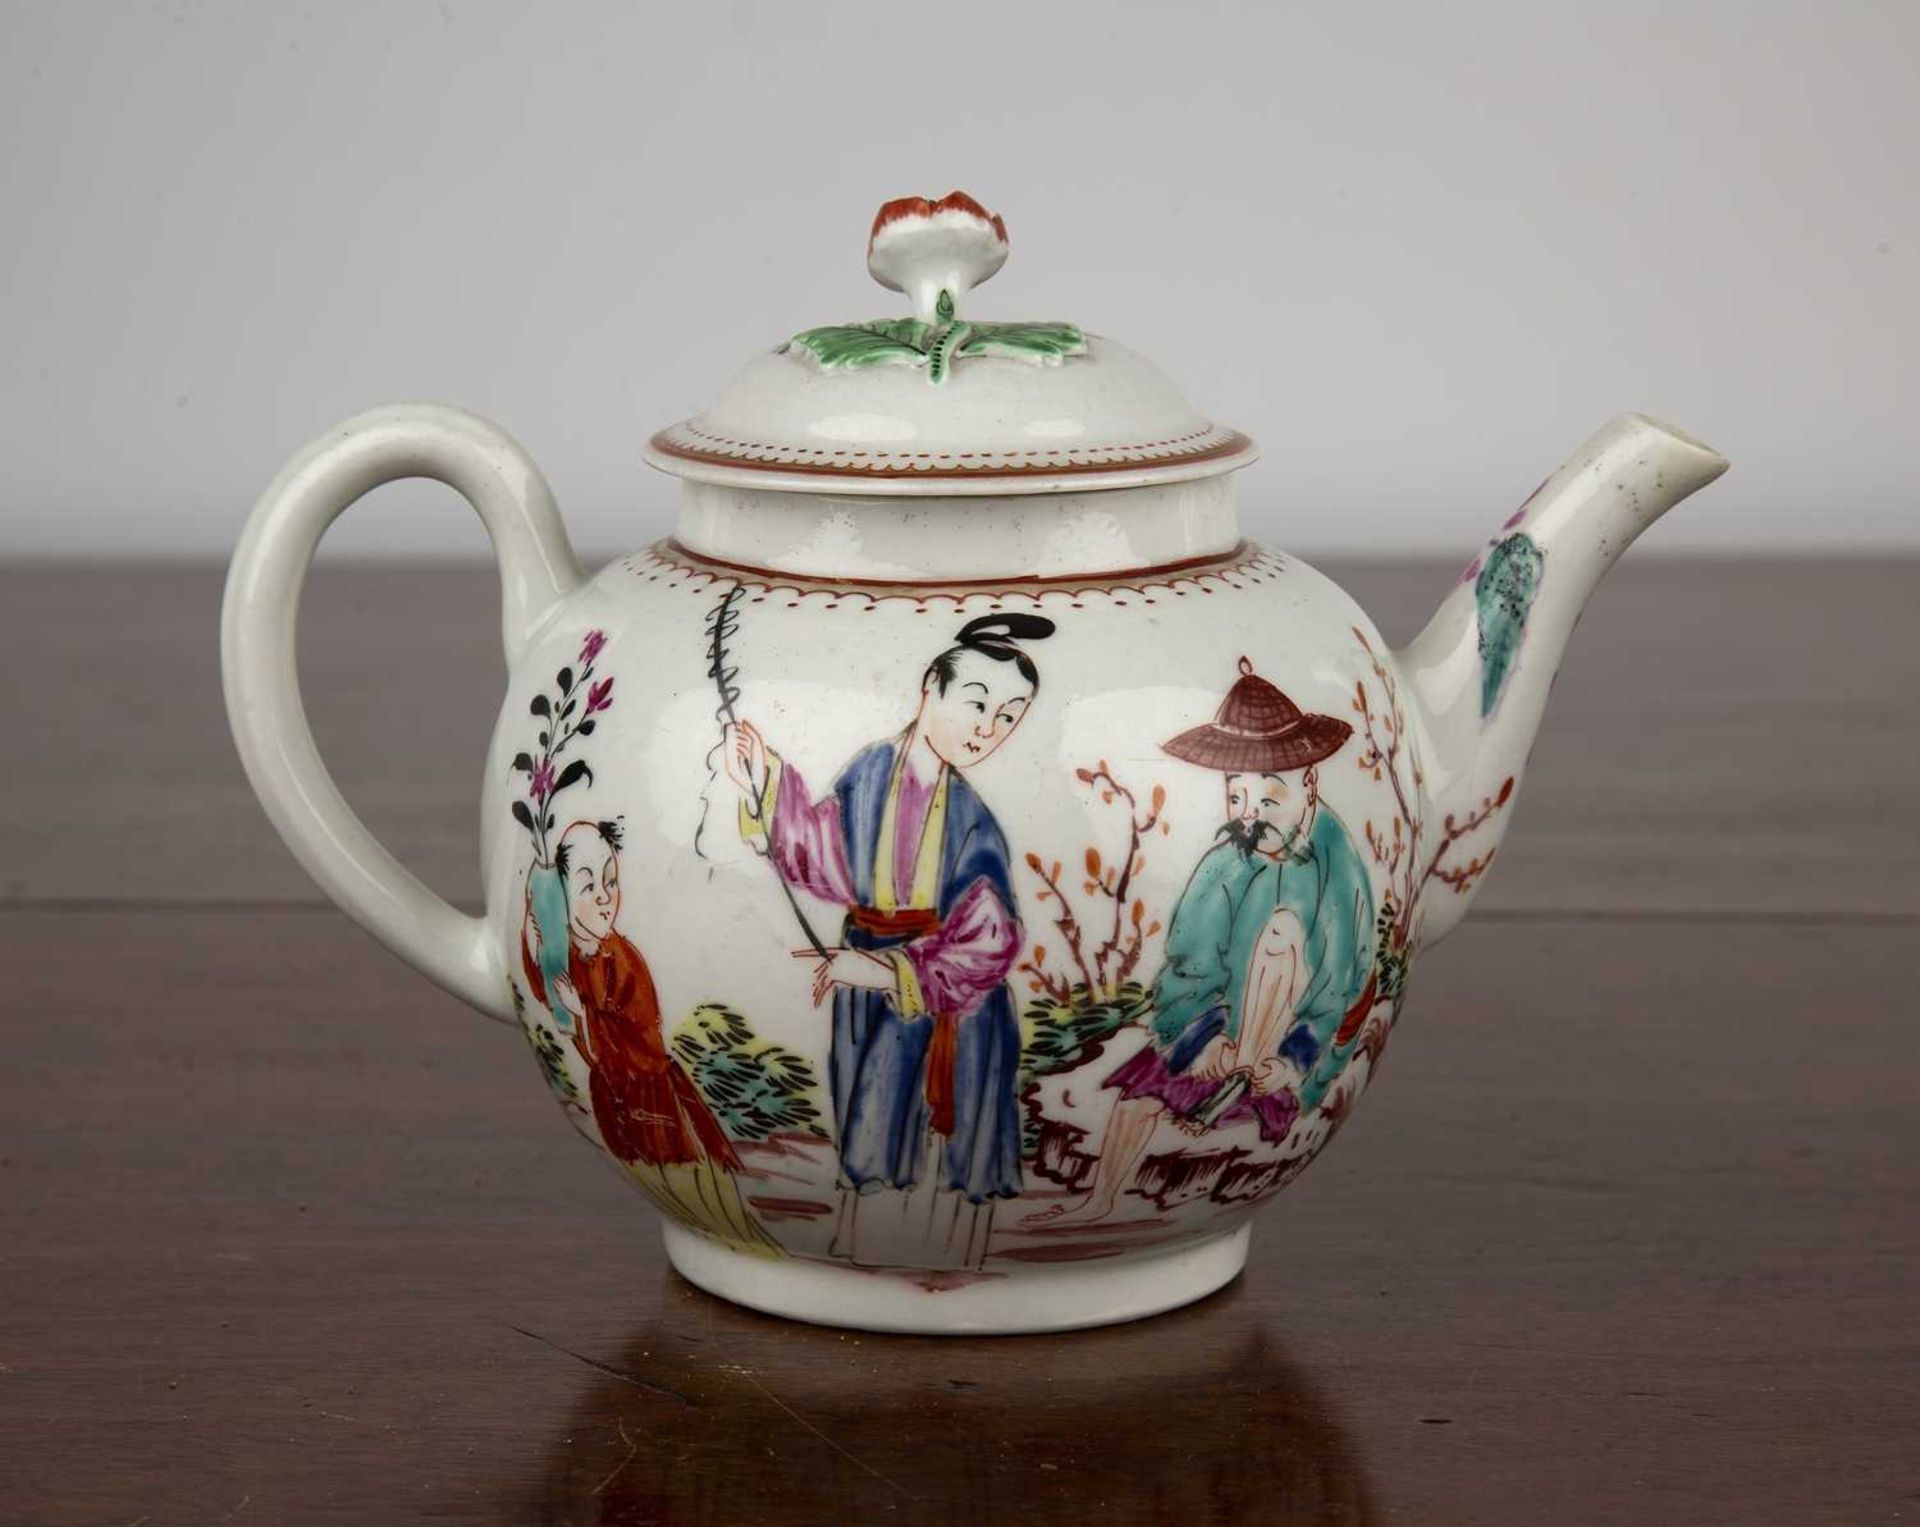 Porcelain teapot, probably Worcester circa 1770, painted with Chinese figures and with a flower - Image 2 of 3